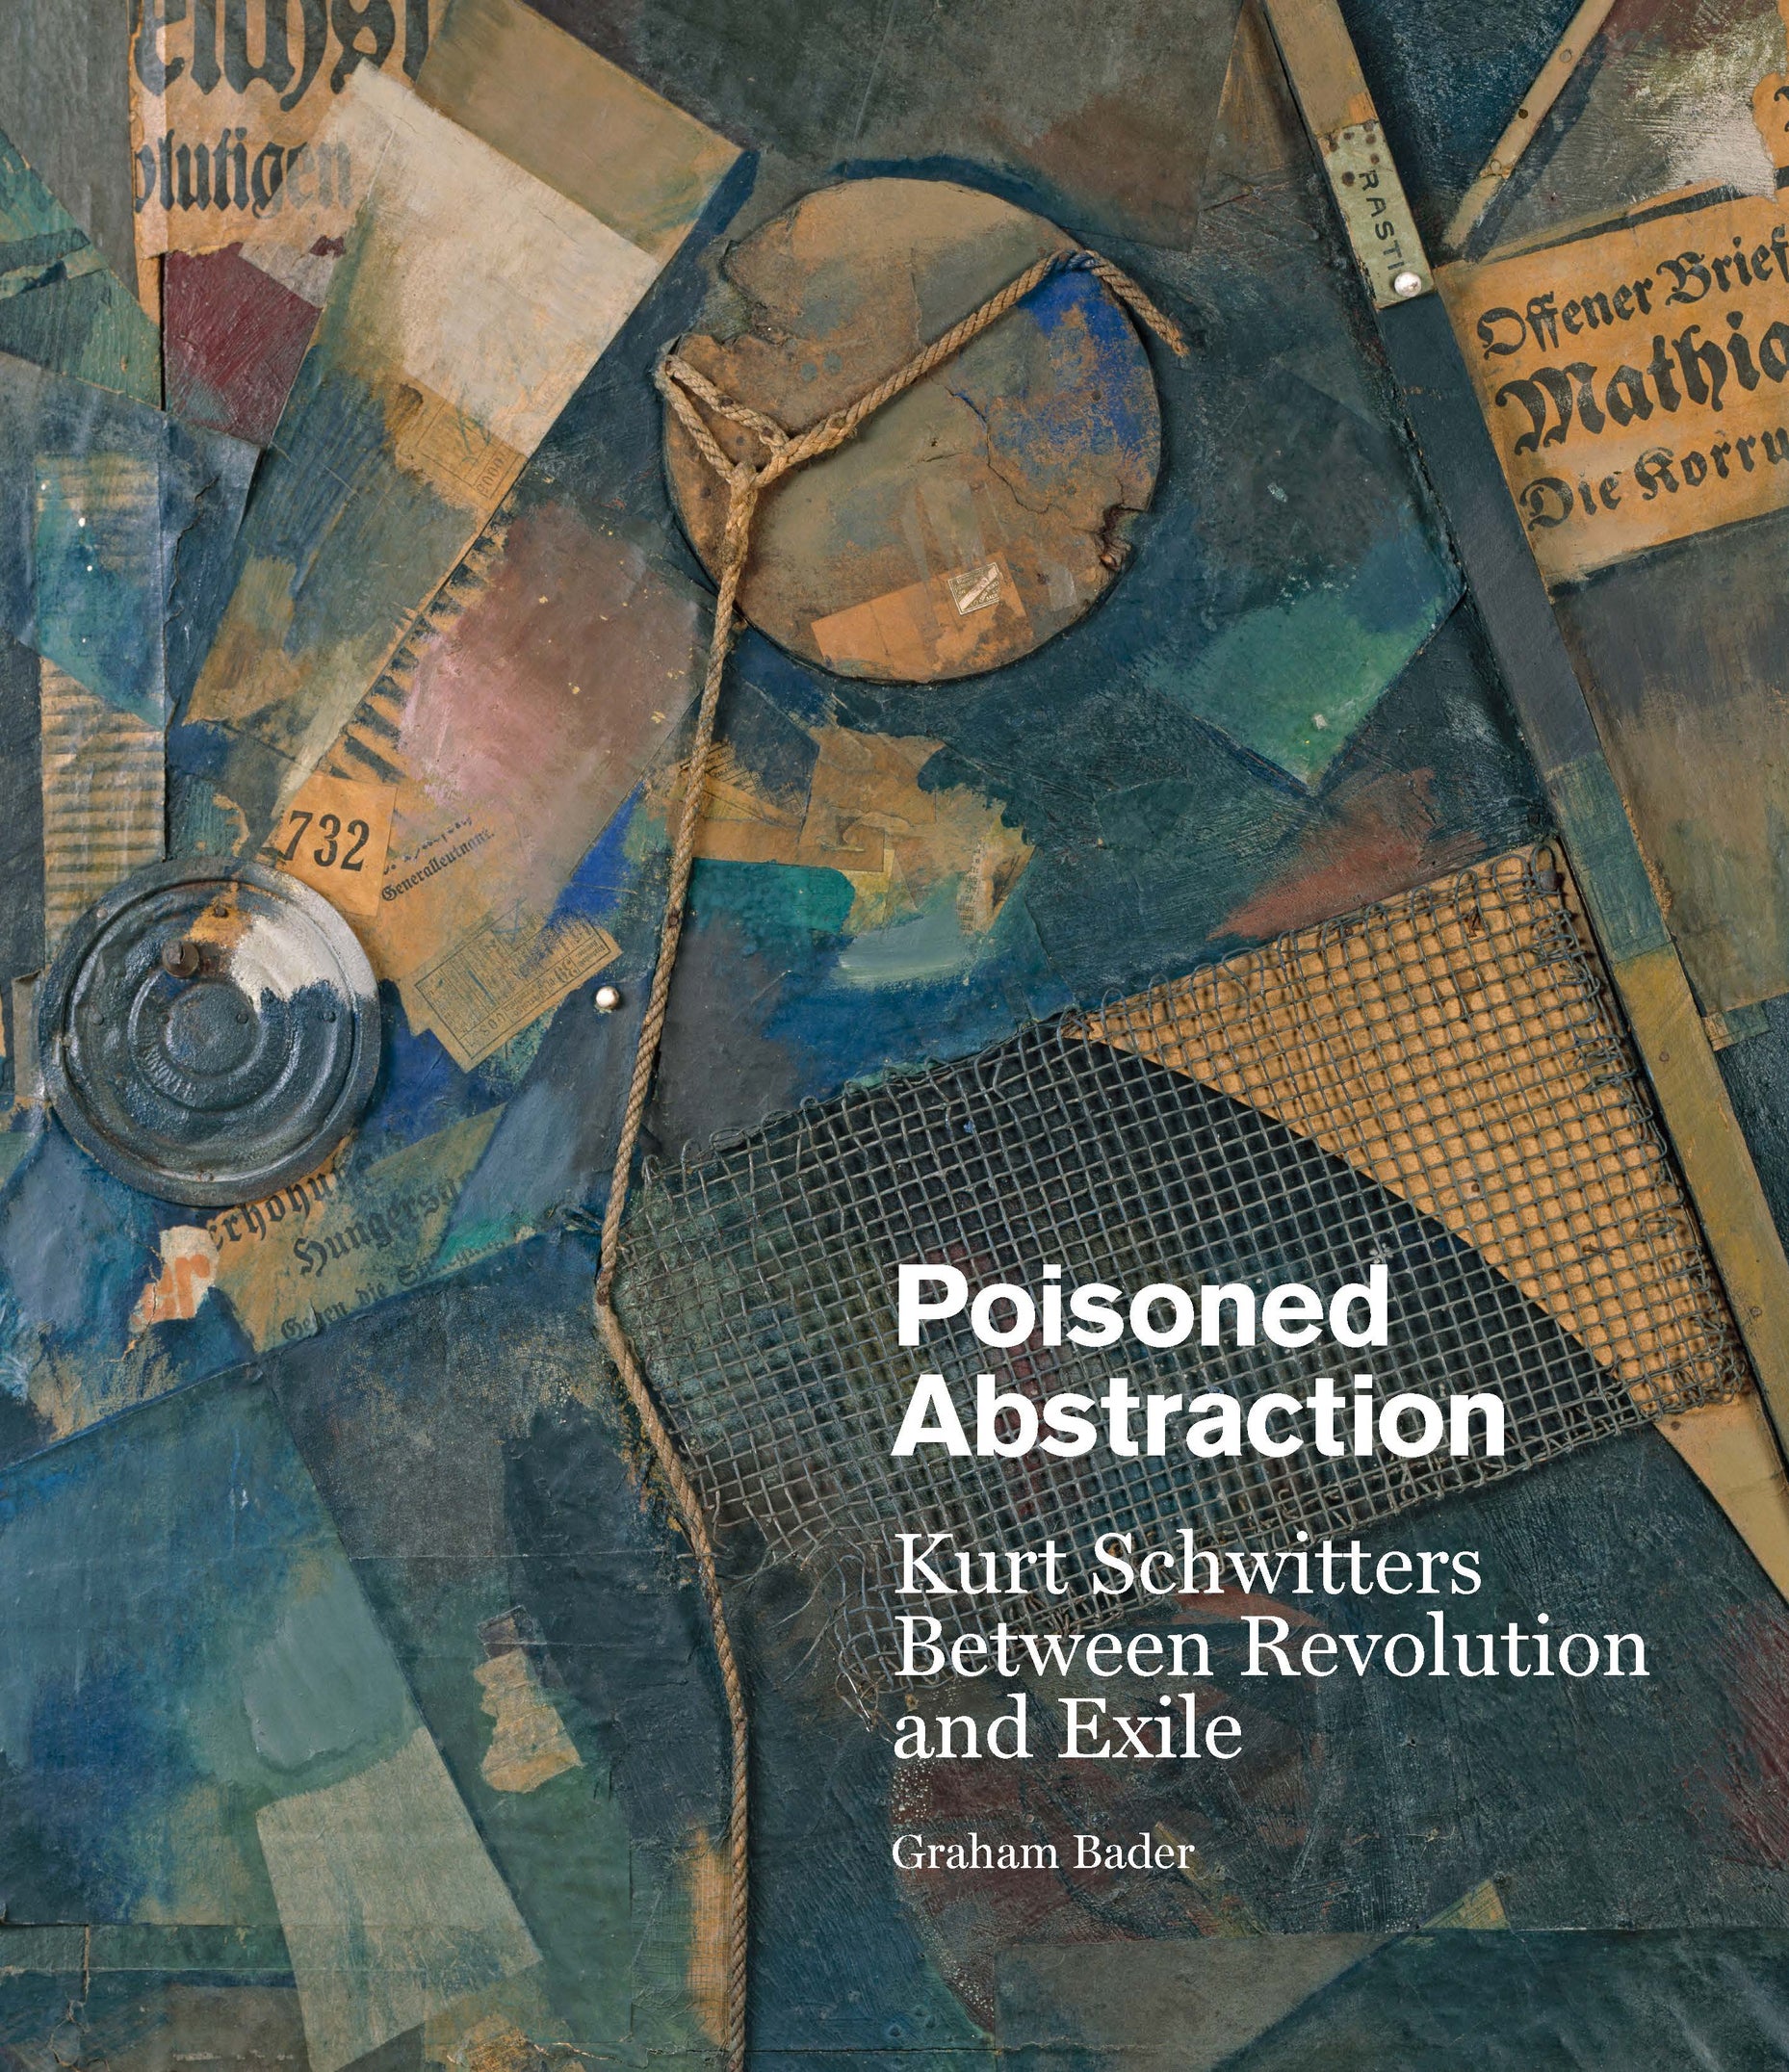 "Poisoned Abstraction" Book Cover